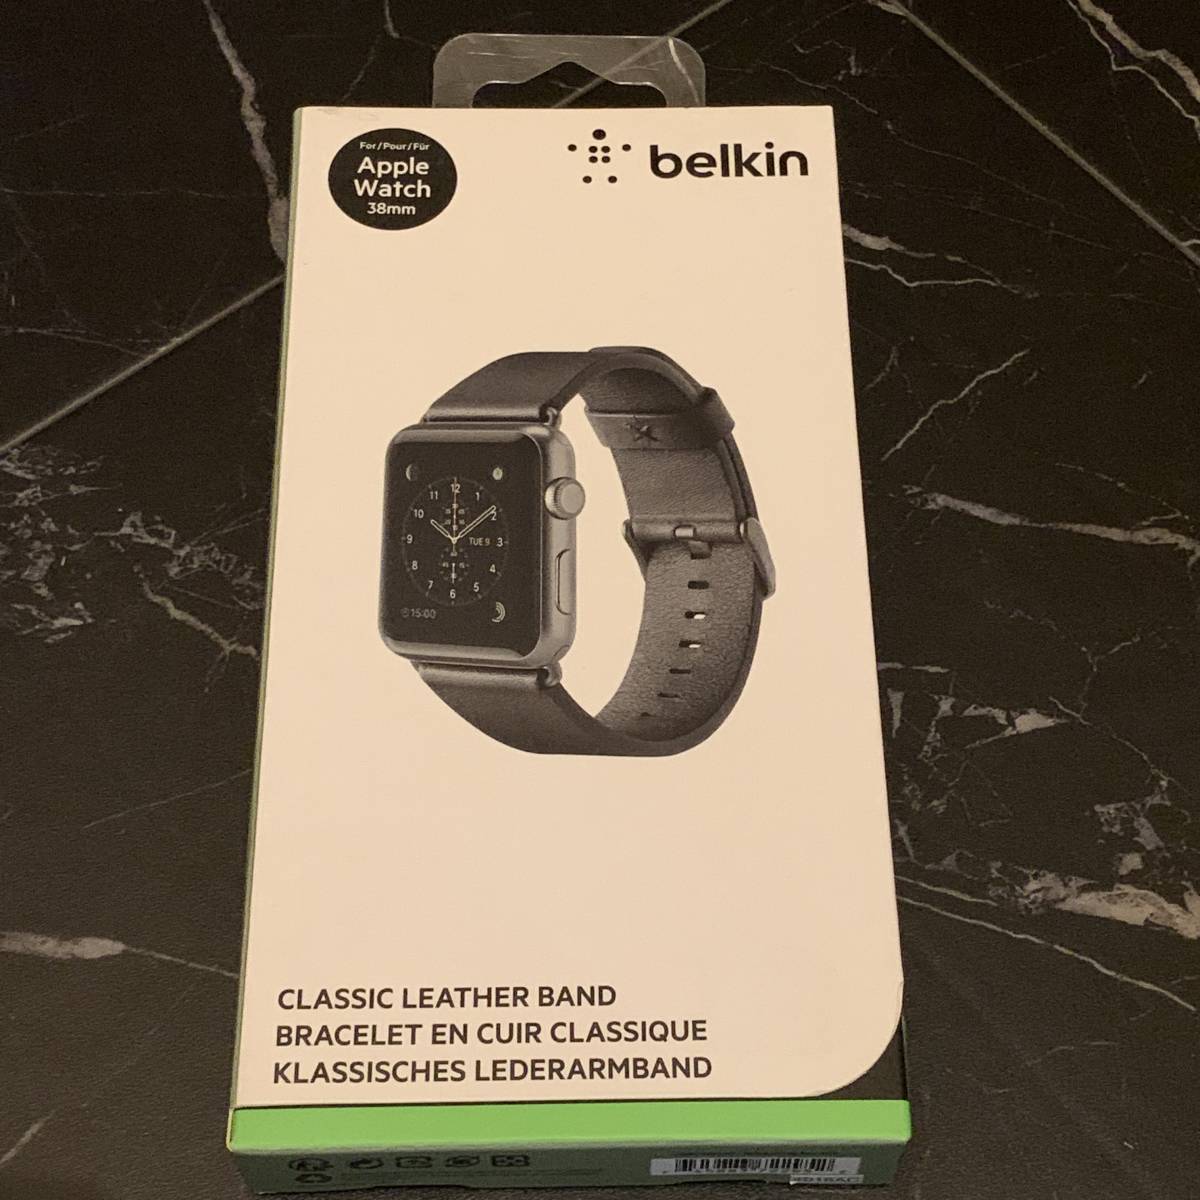  new goods unopened * free shipping #Belkin* bell gold #Classic Leather Band for Apple Watch 38mm F8W731BTC00 black # Classic leather band 